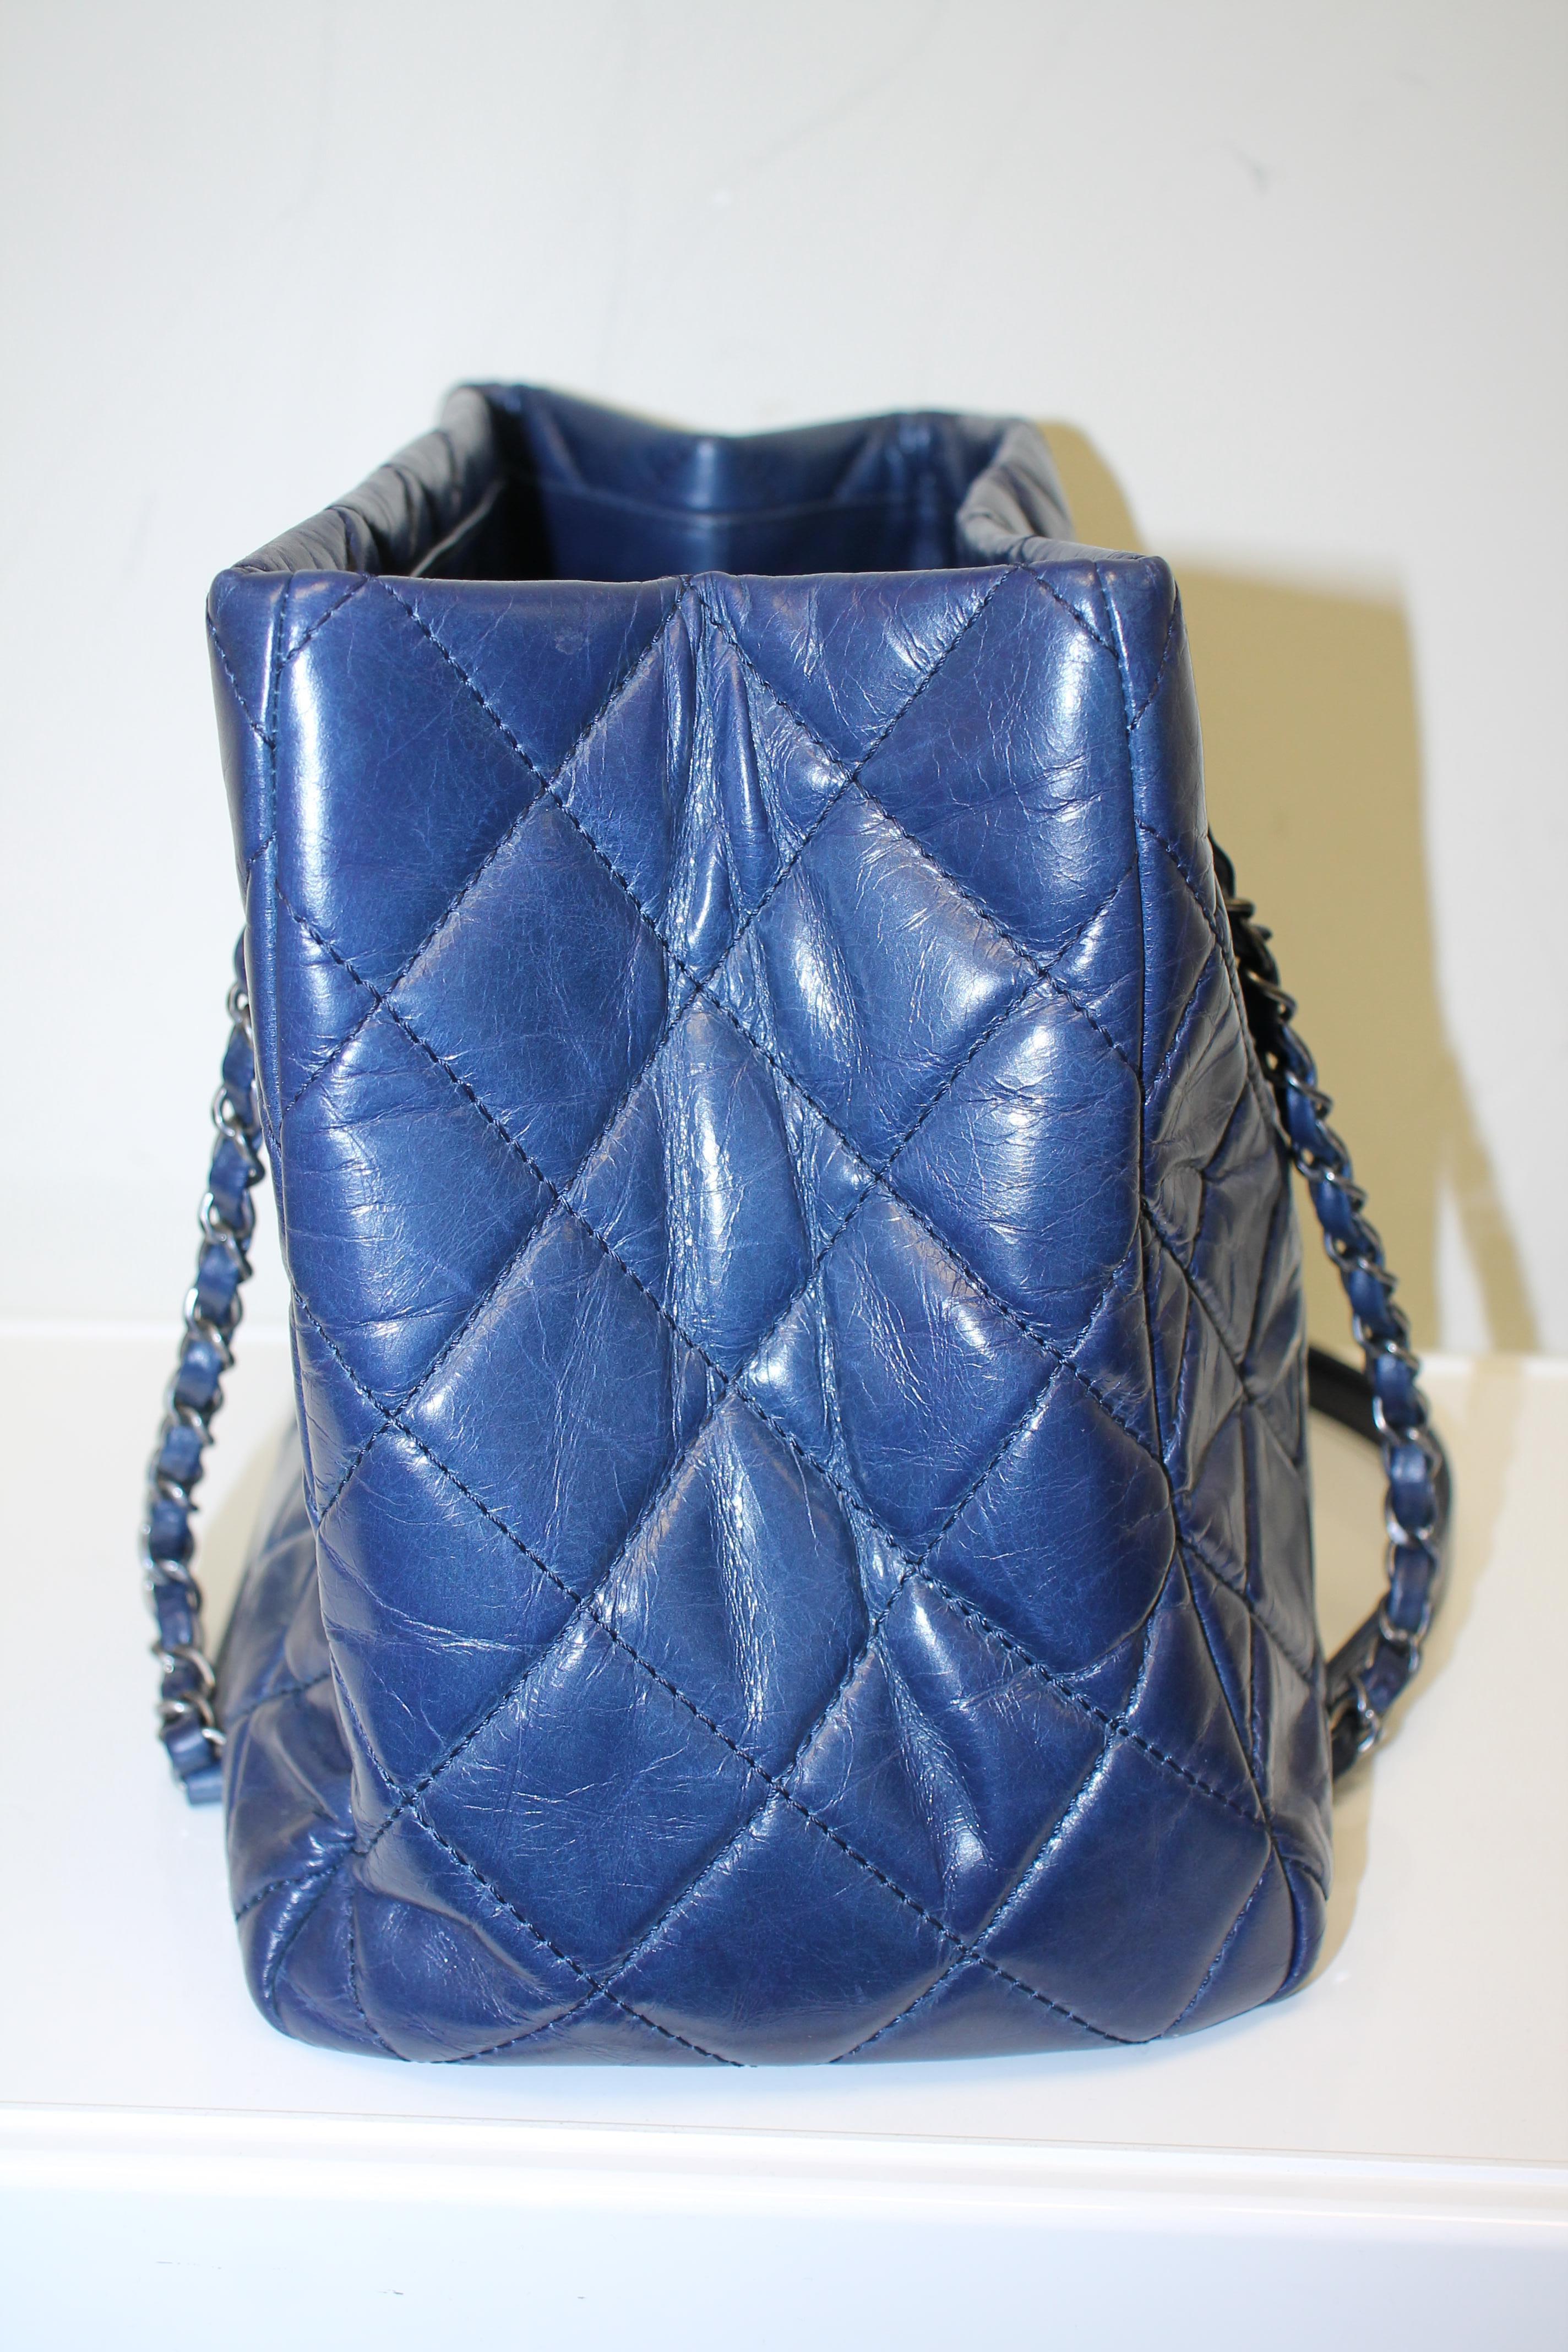 ​From the 2015 Cruise Collection. Navy quilted aged calfskin leather. Antique silver-tone hardware. Opened top. Dual chain-link and leather straps with leather shoulder pad. 